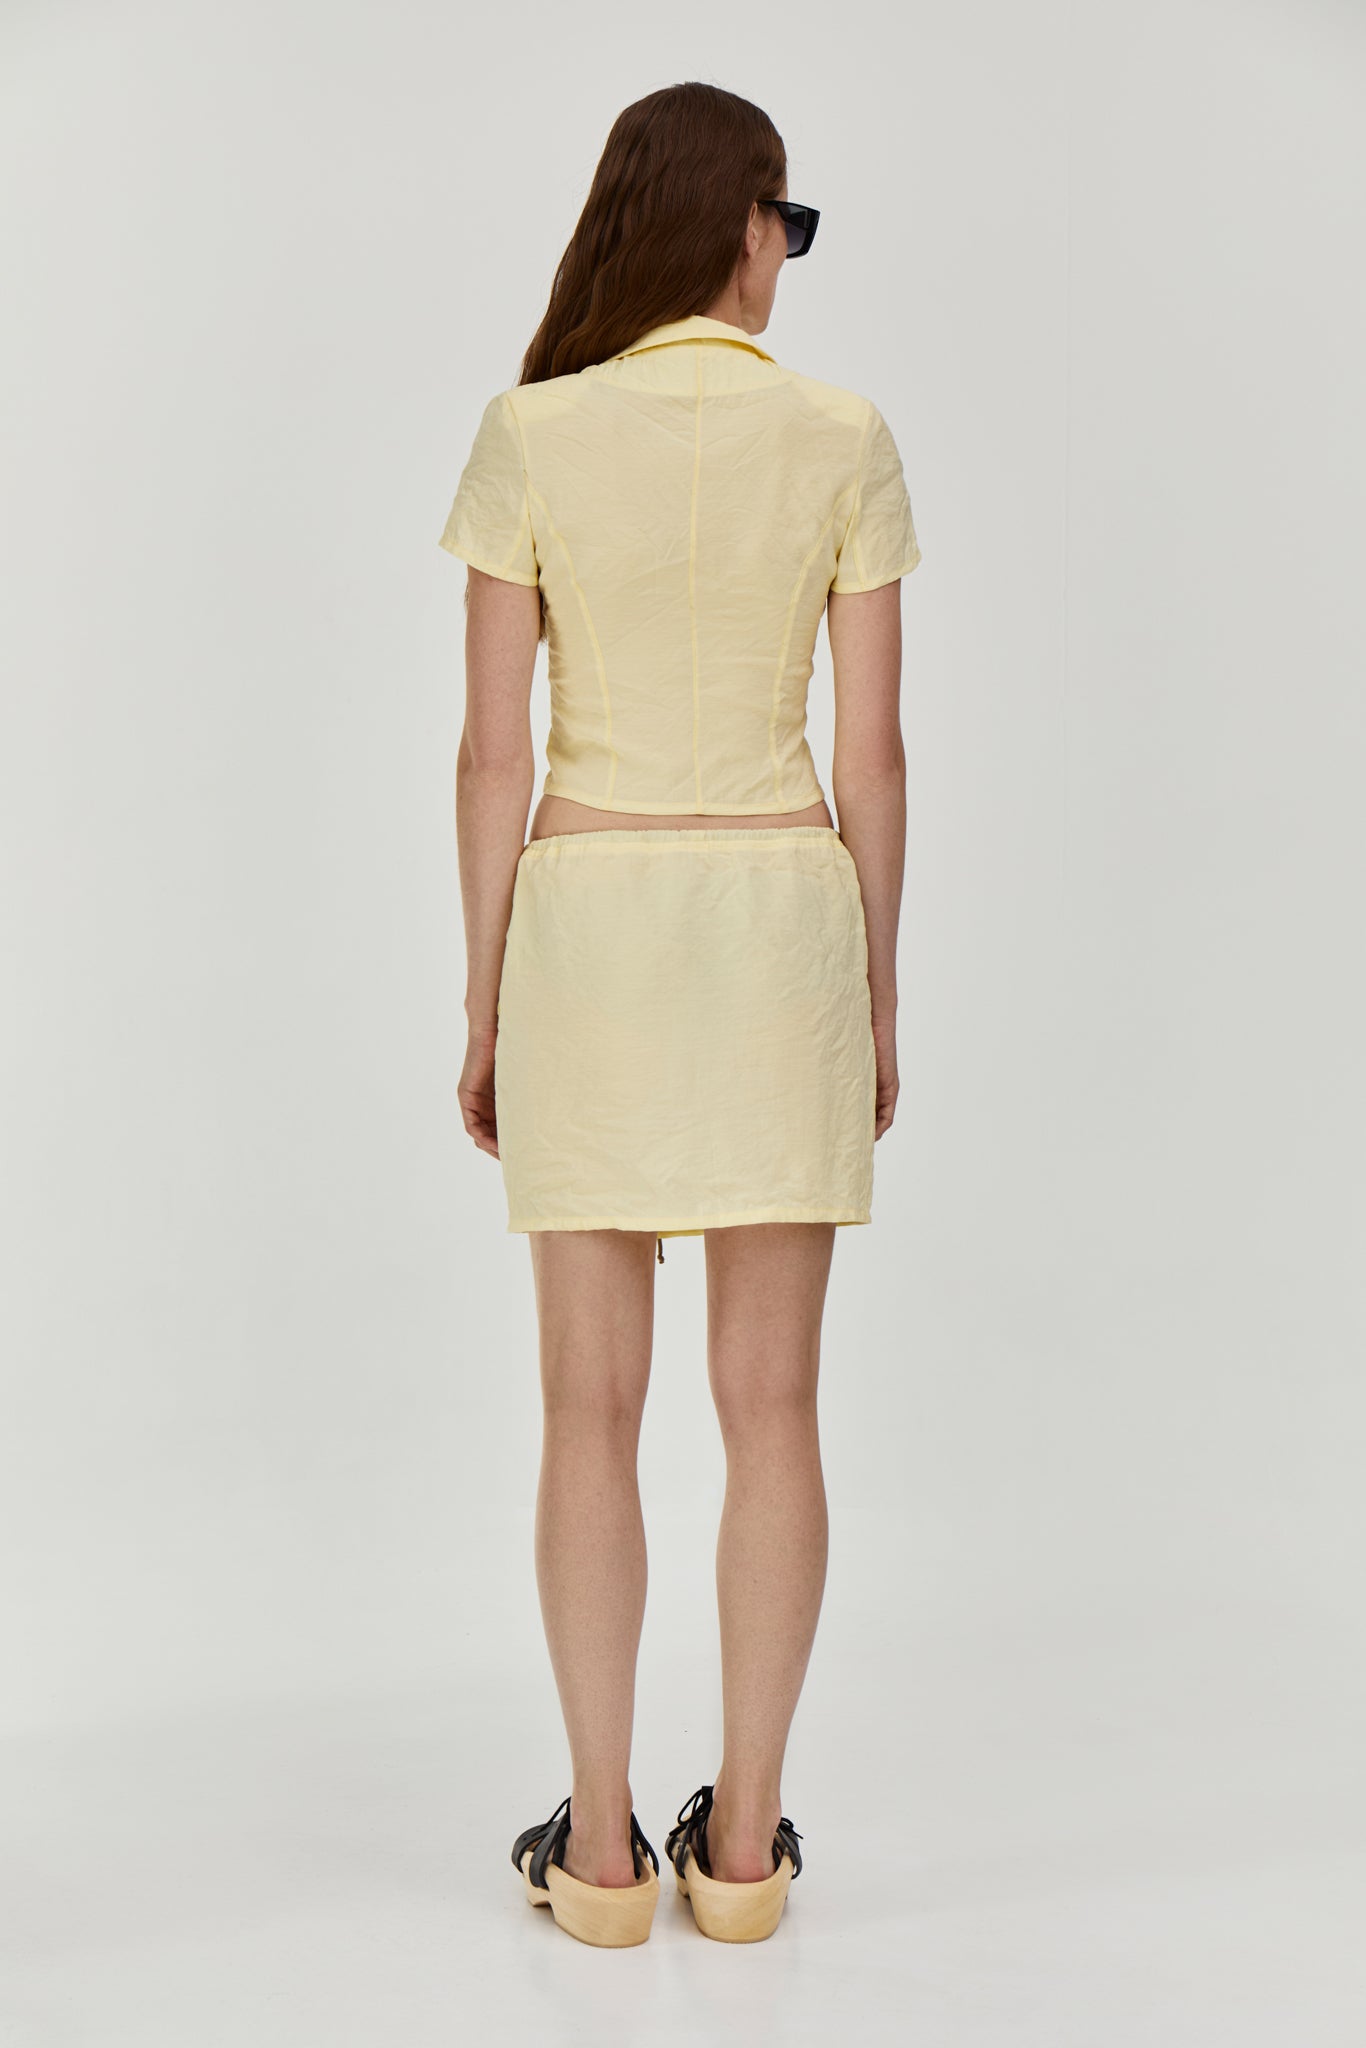 Viscose blend skirt featuring a drawstring fastening waist, side pockets and a short length. Yellow suit from FORMA brand